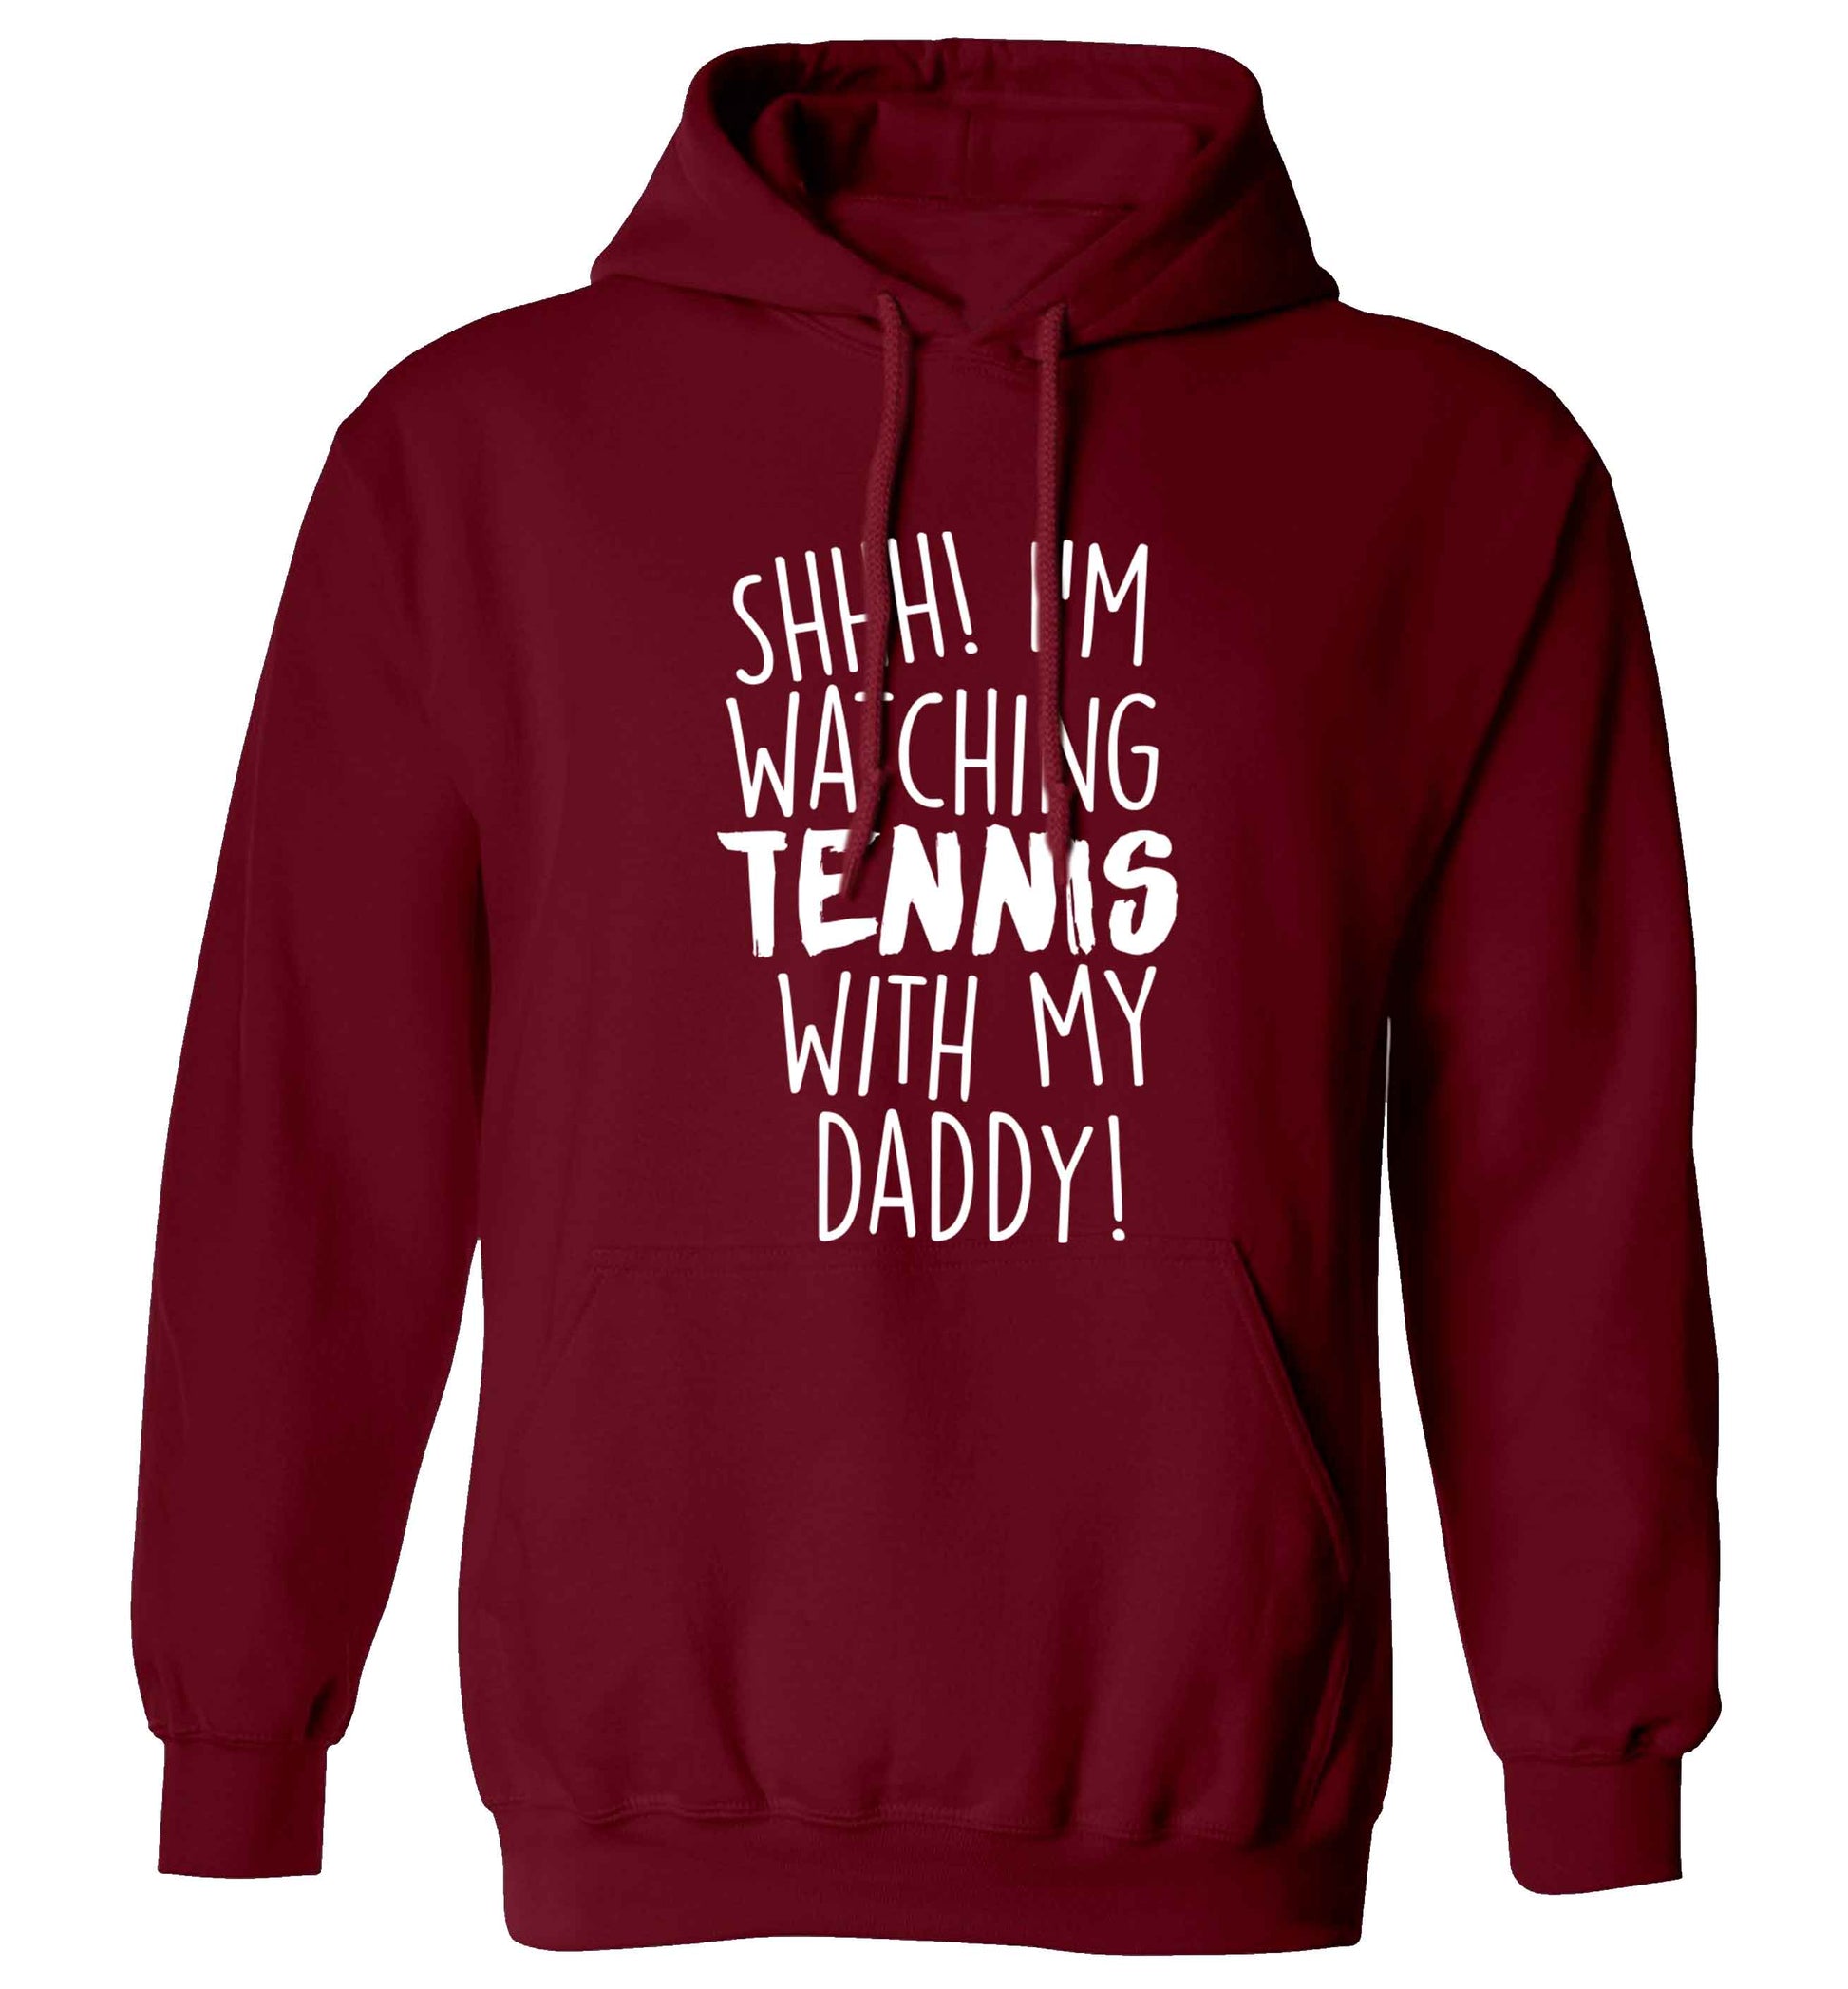 Shh! I'm watching tennis with my daddy! adults unisex maroon hoodie 2XL